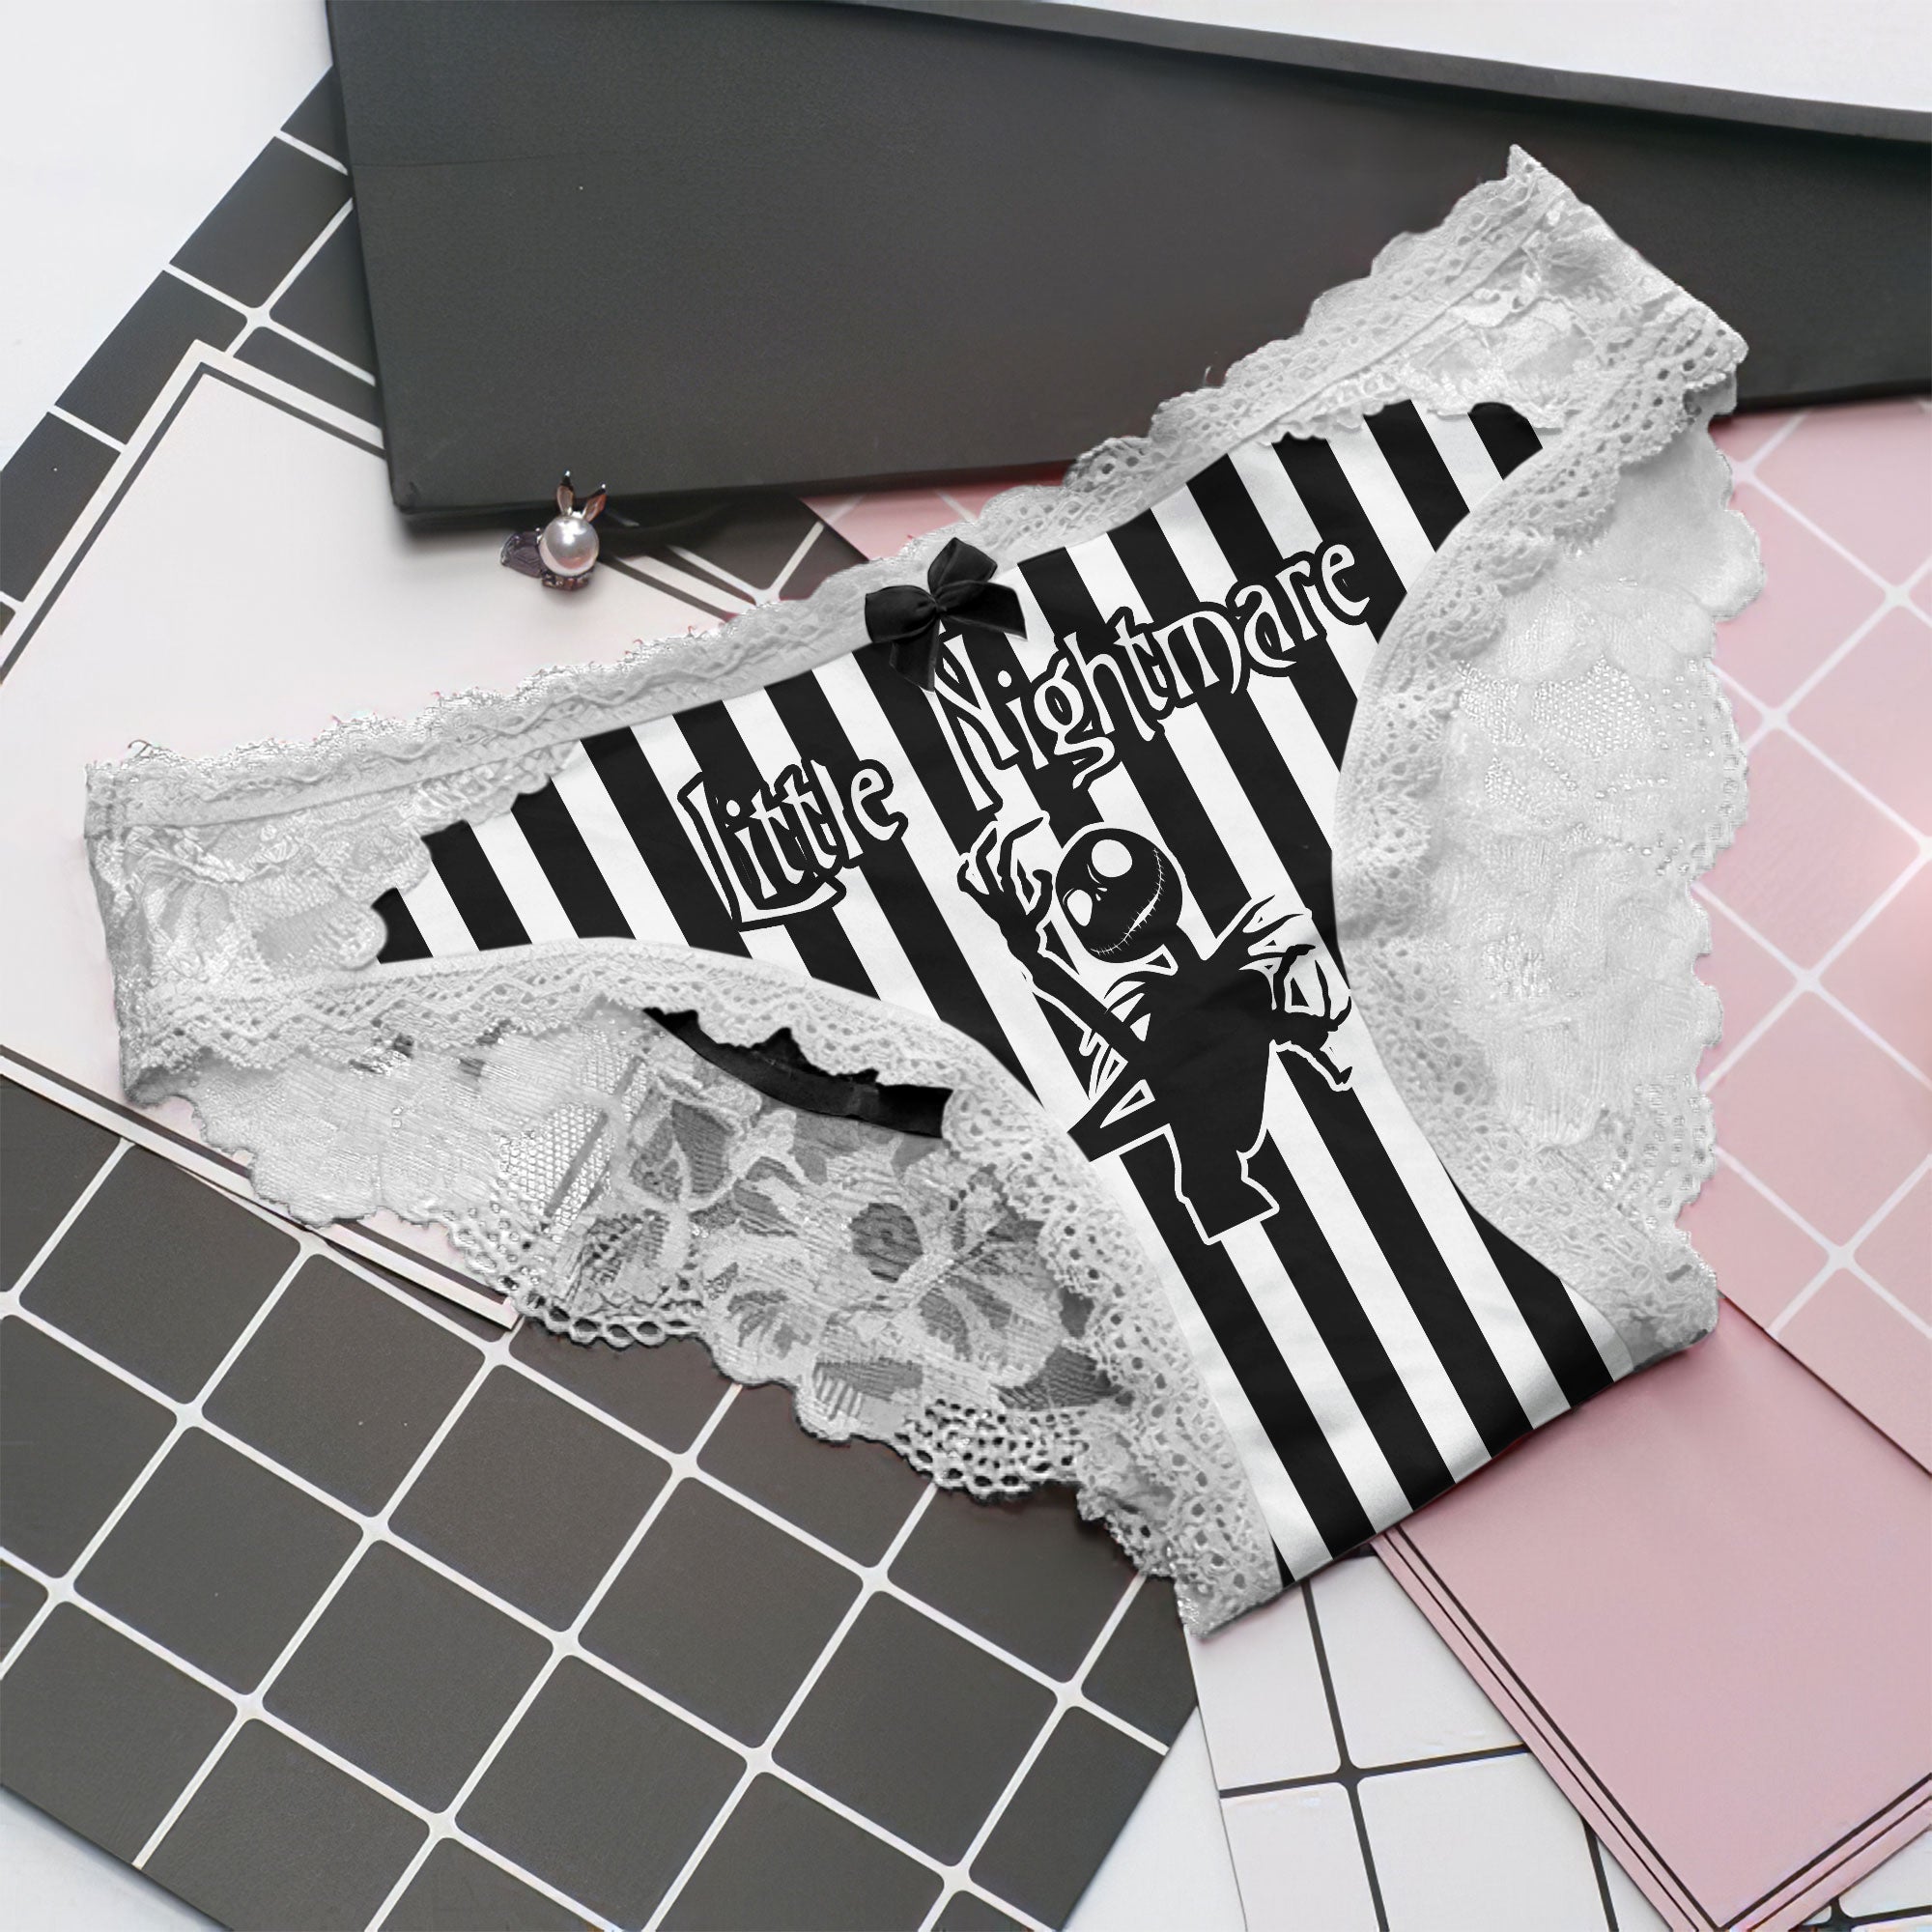 Sensual lace panties trio for a touch of chic elegance.